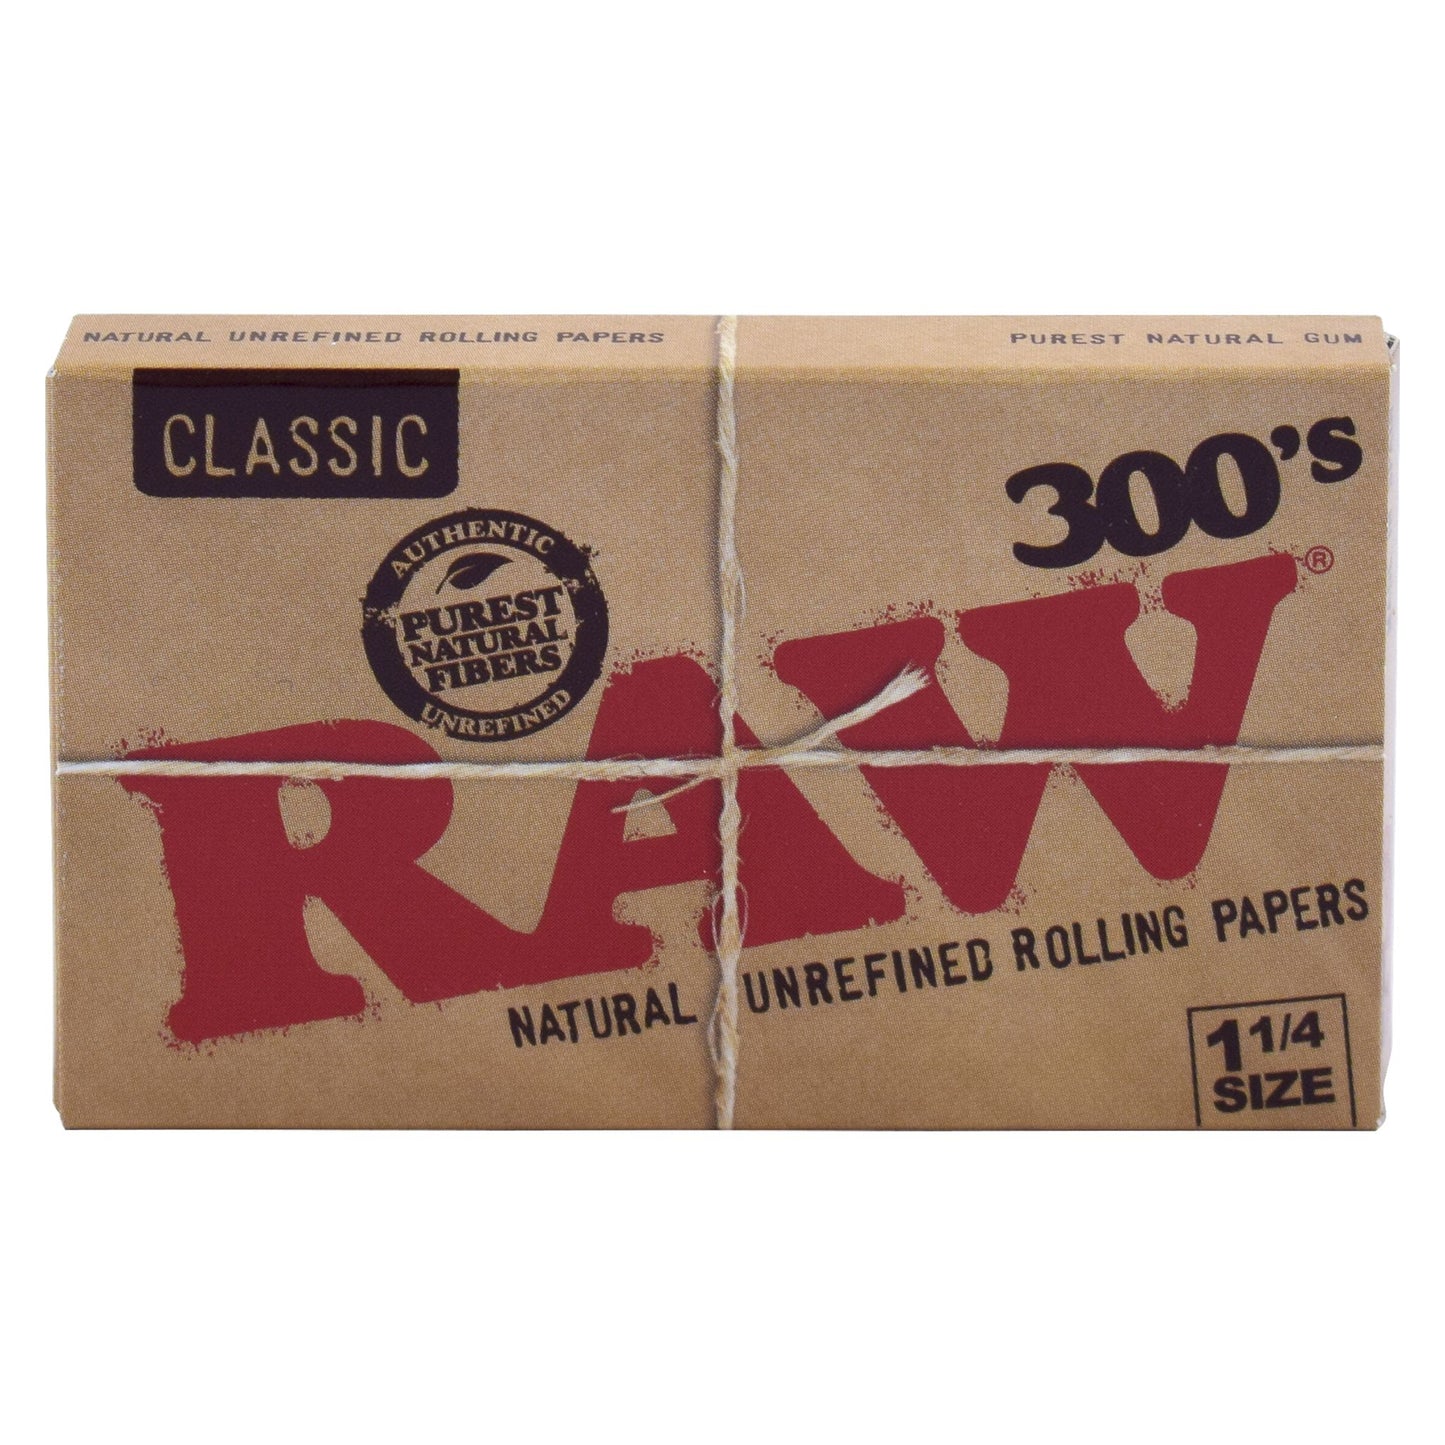 RAW - Natural Unrefined Rolling Papers